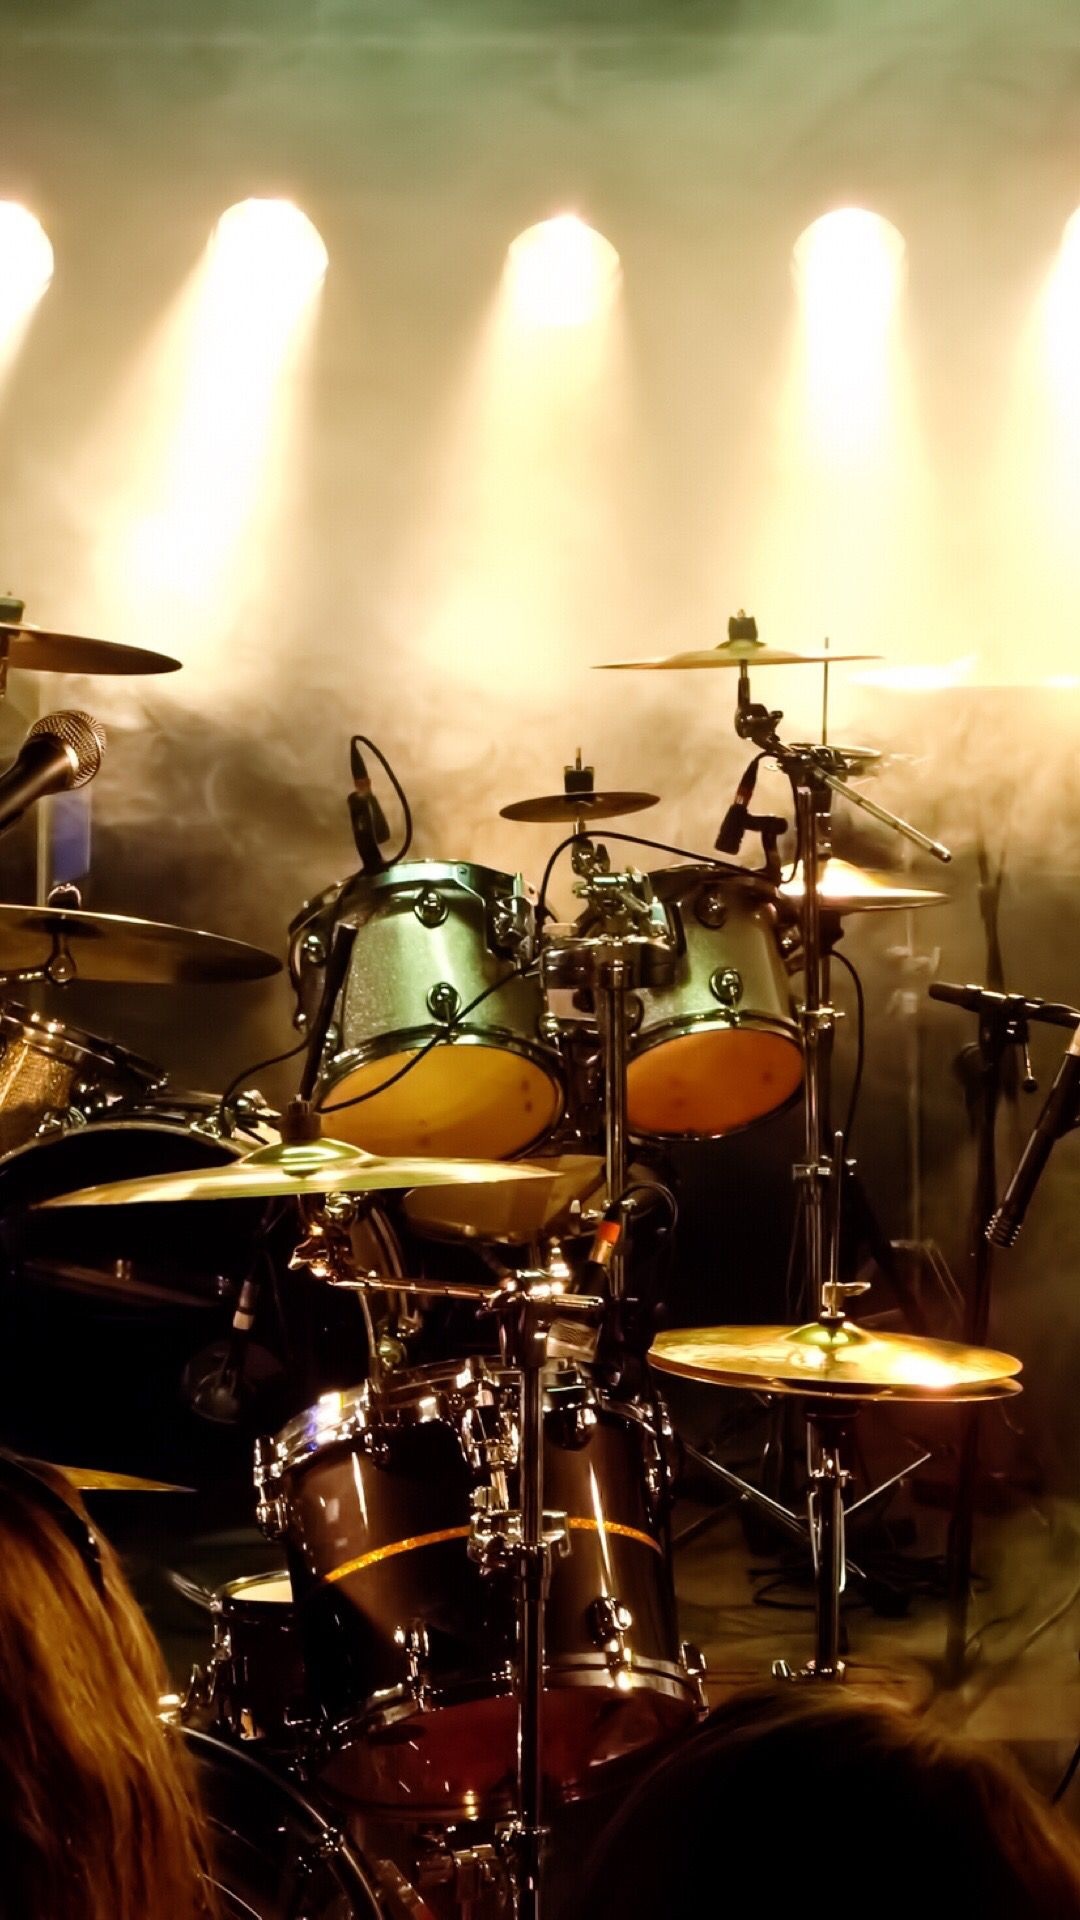 Drums: Live Performance, Fog Effect, All Lights Directed To The Stage, Drum Kit. 1080x1920 Full HD Wallpaper.